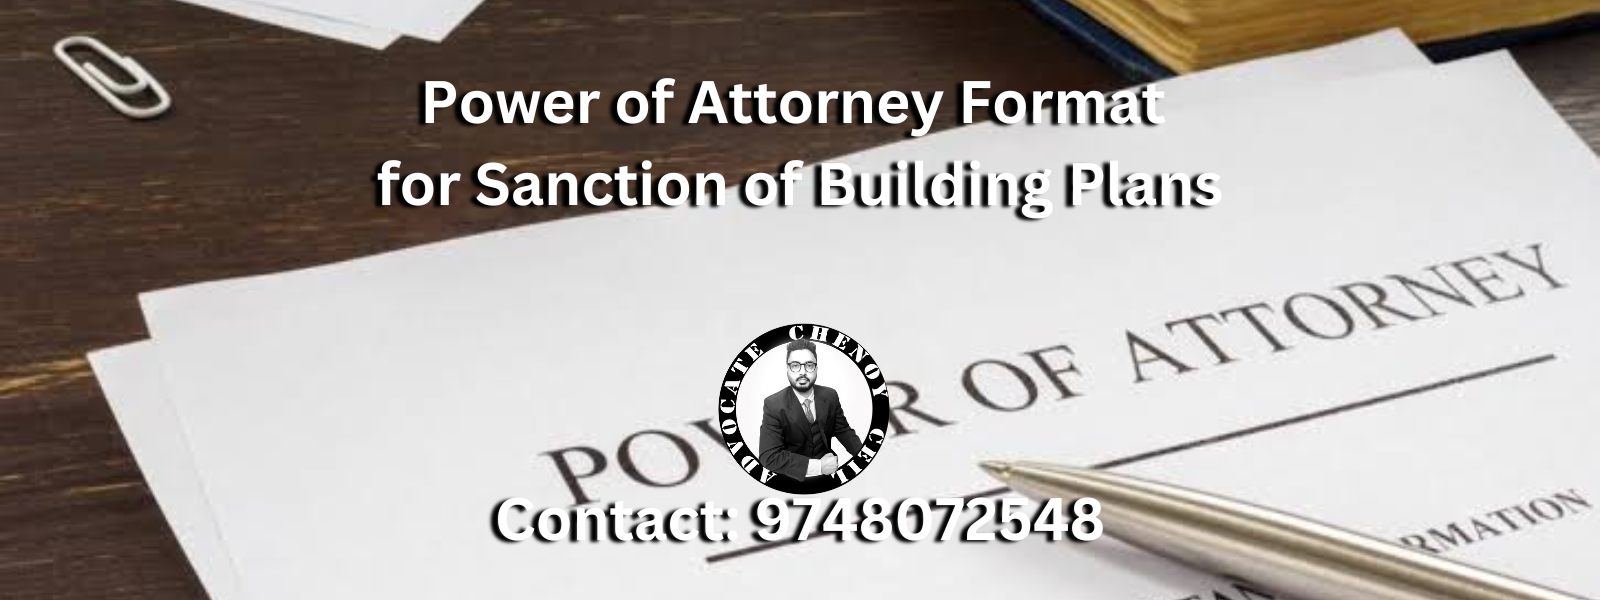 Power of Attorney Format West Bengal